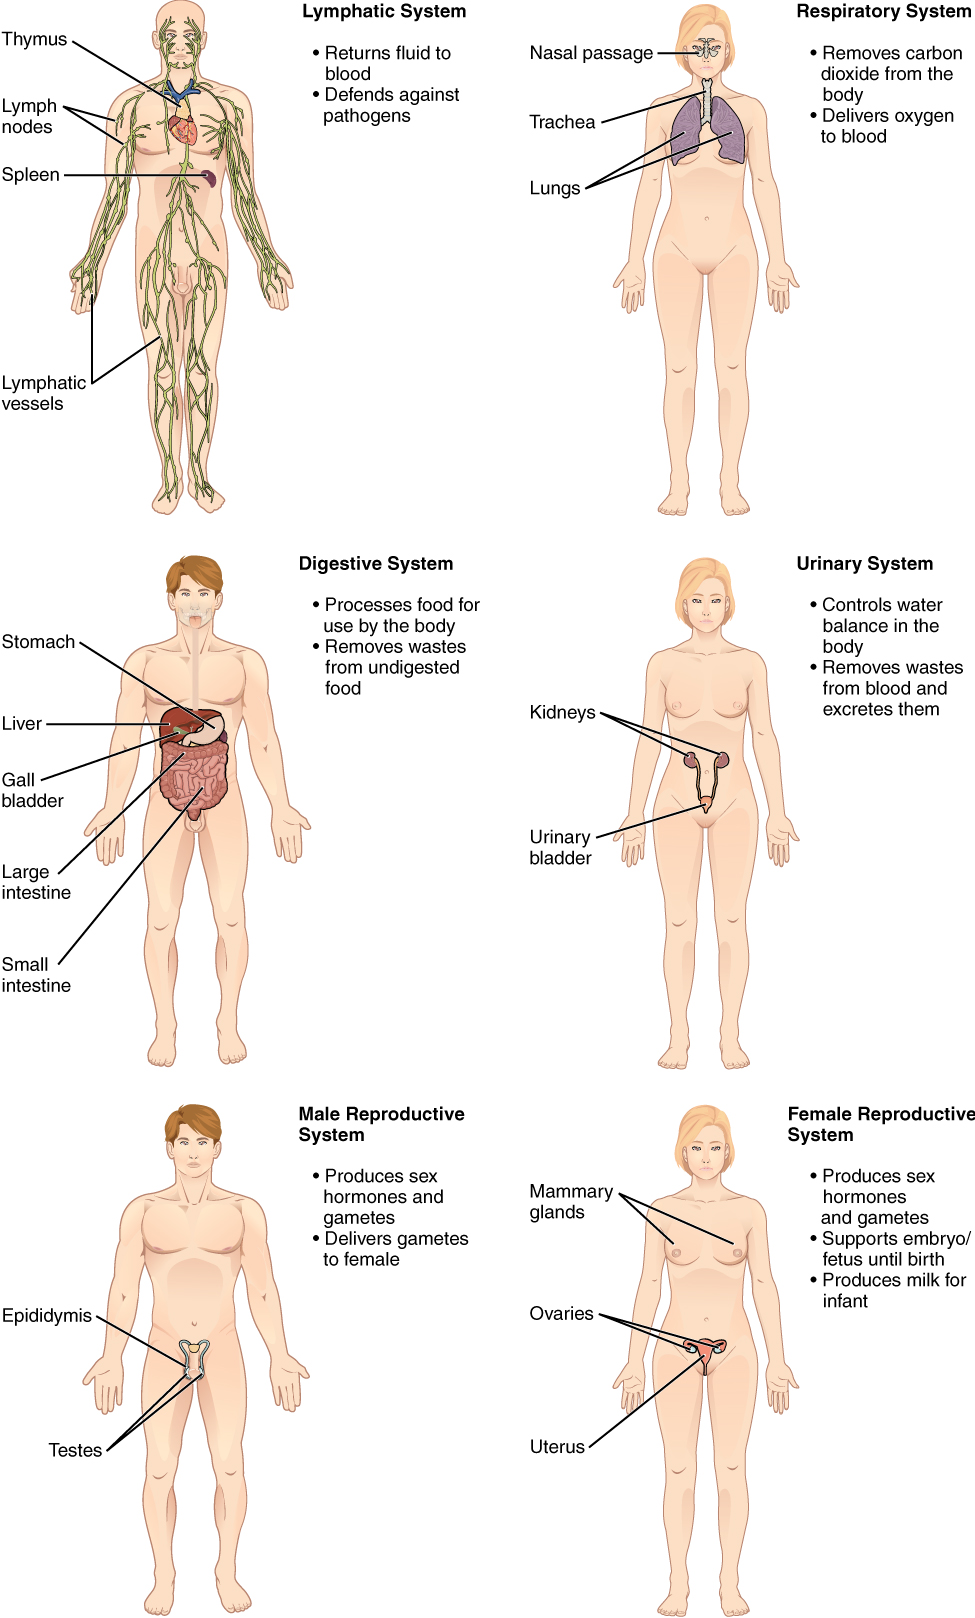 Organ Systems of the Human Body continued from Figure 5.2. Image description available.